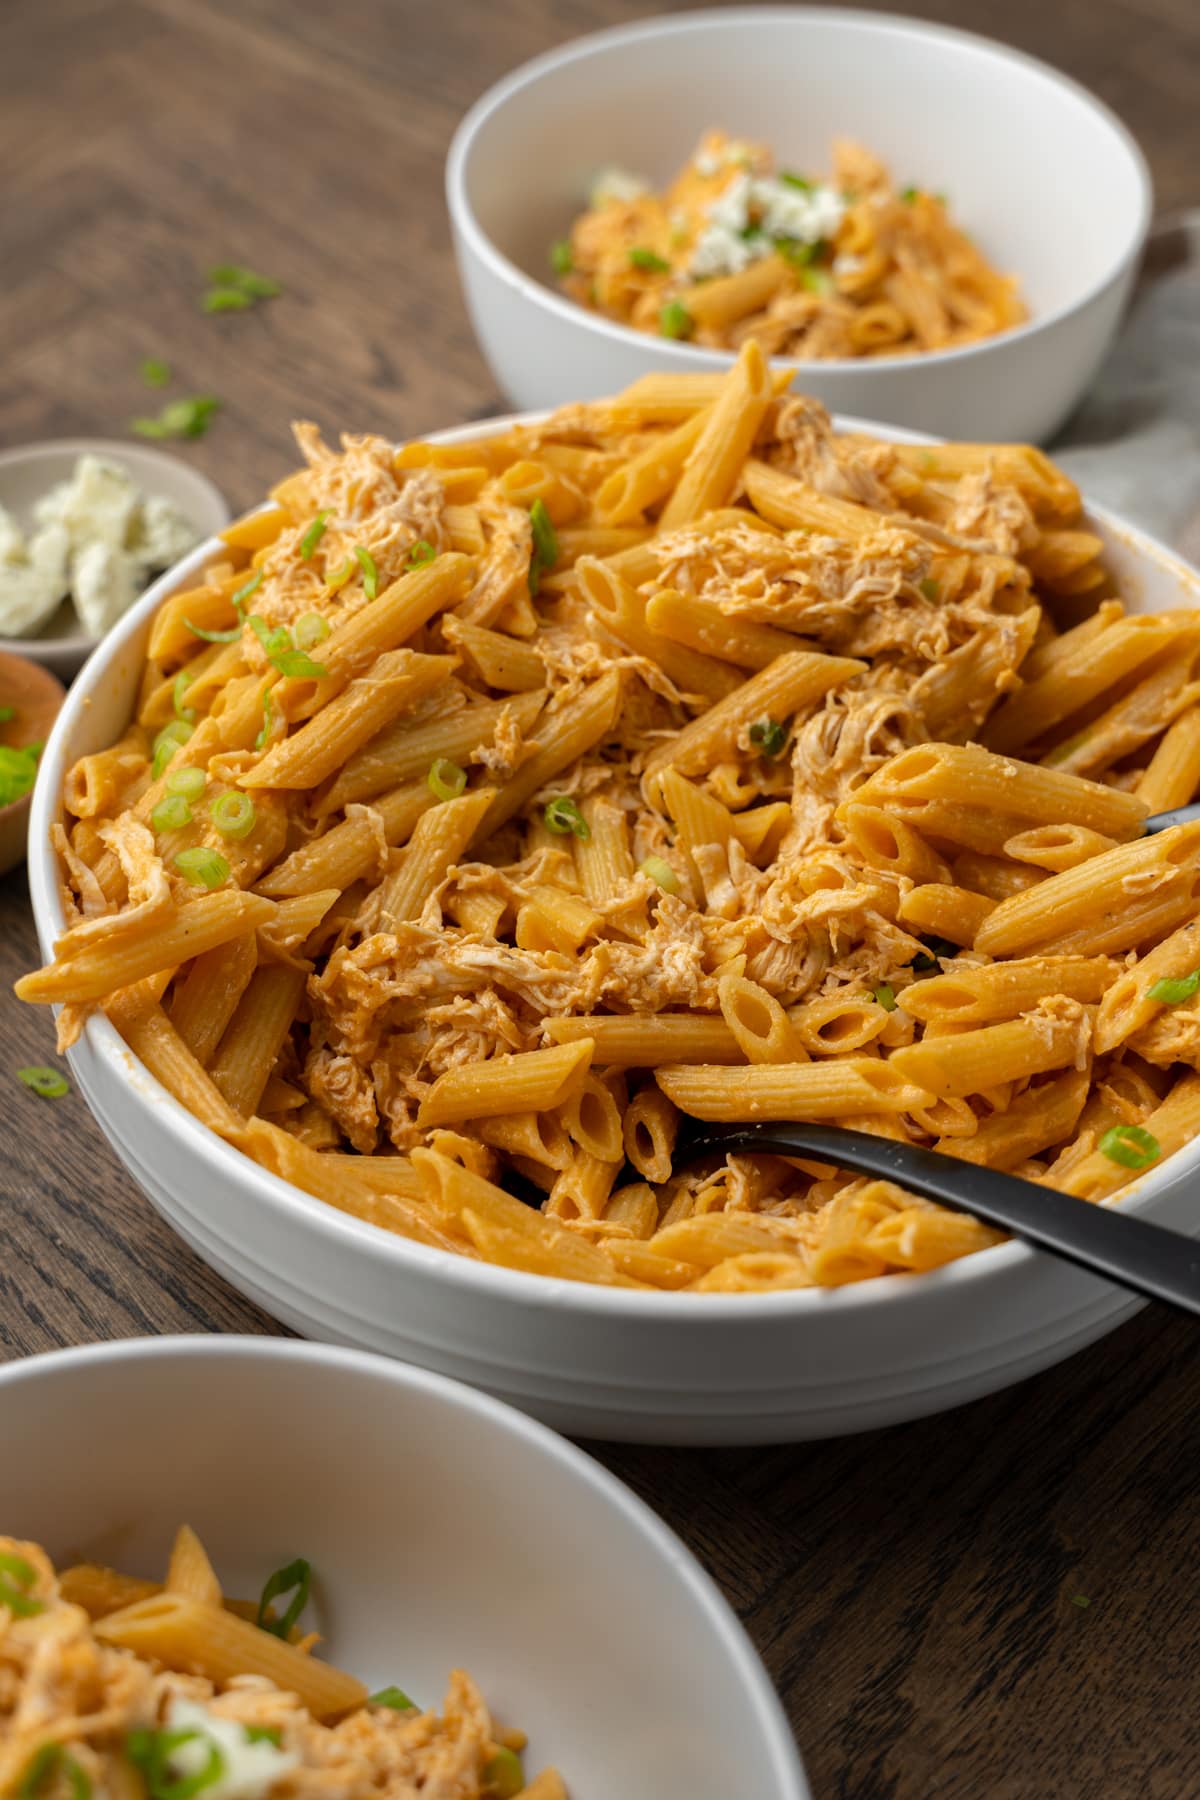 Spoon in a large bowl of buffalo chicken pasta.